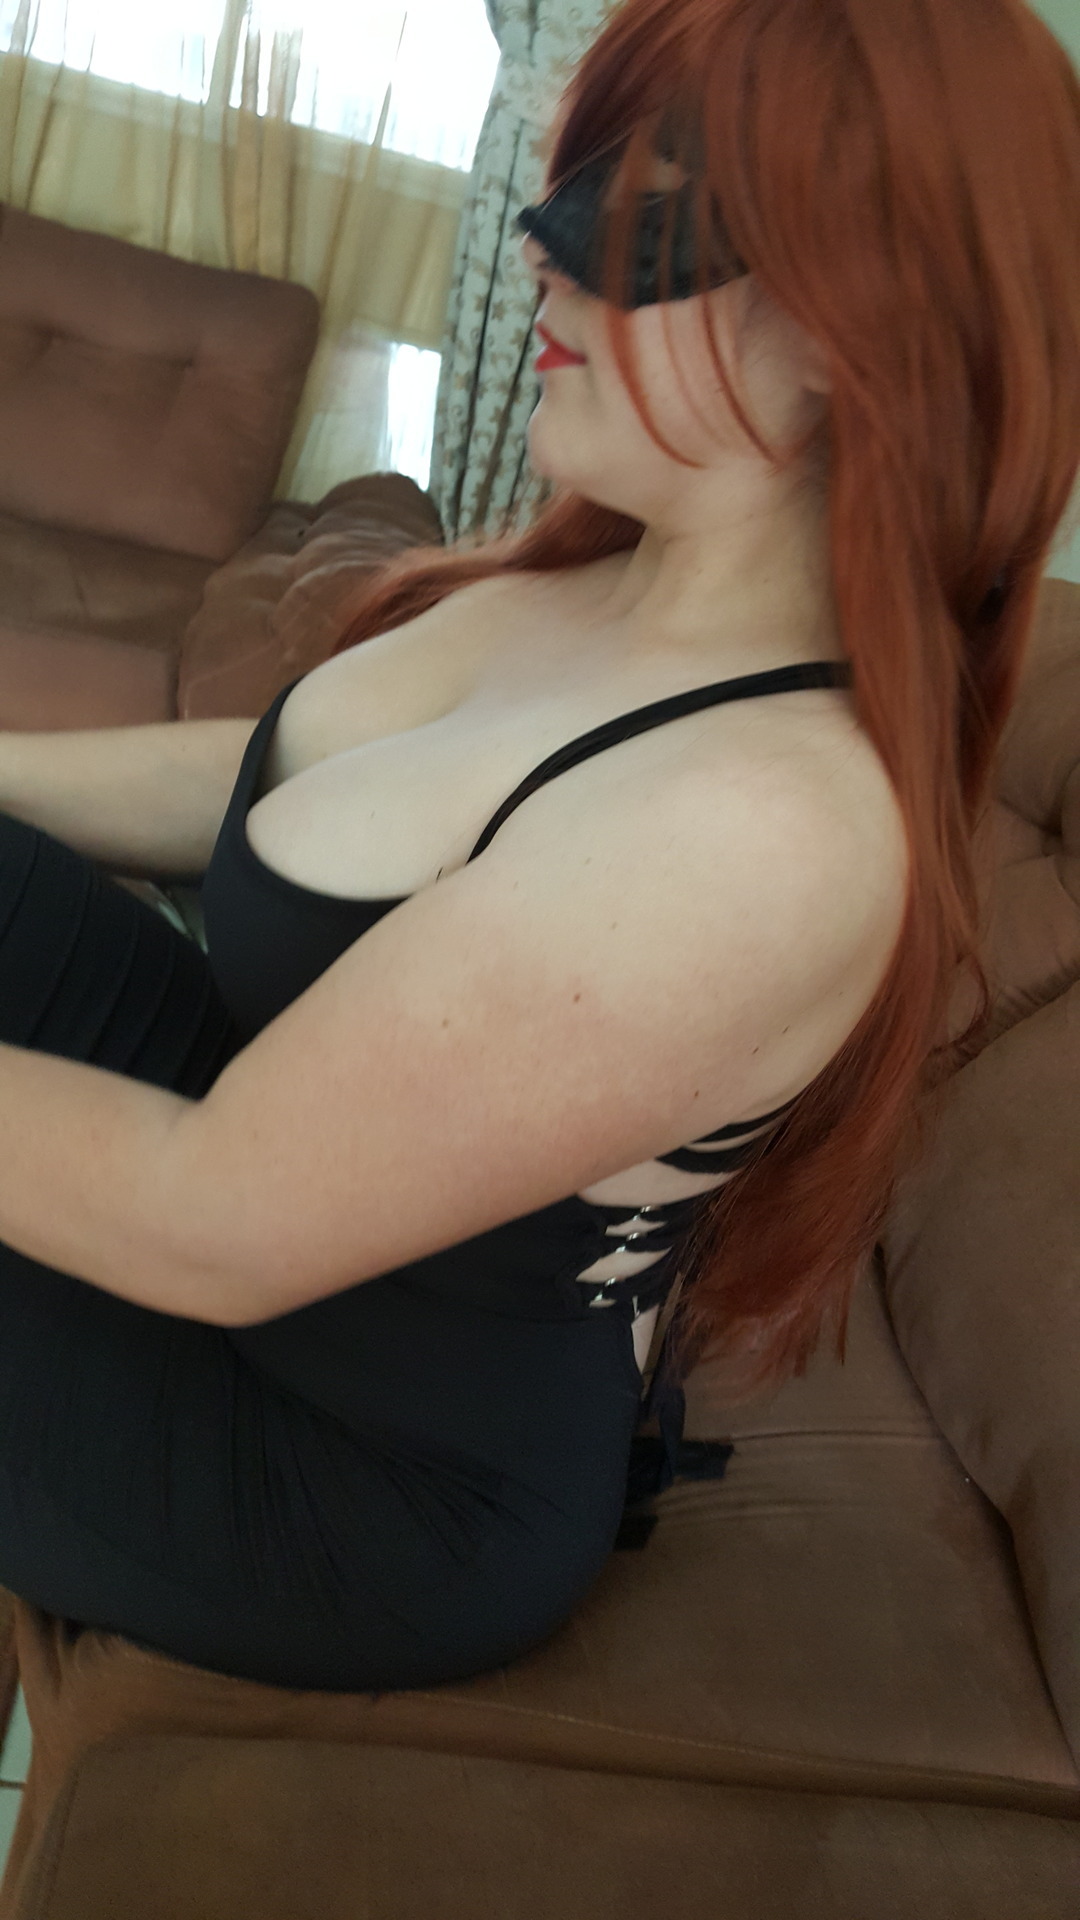 badnaughtywife:  Should I wear this dress adult photos